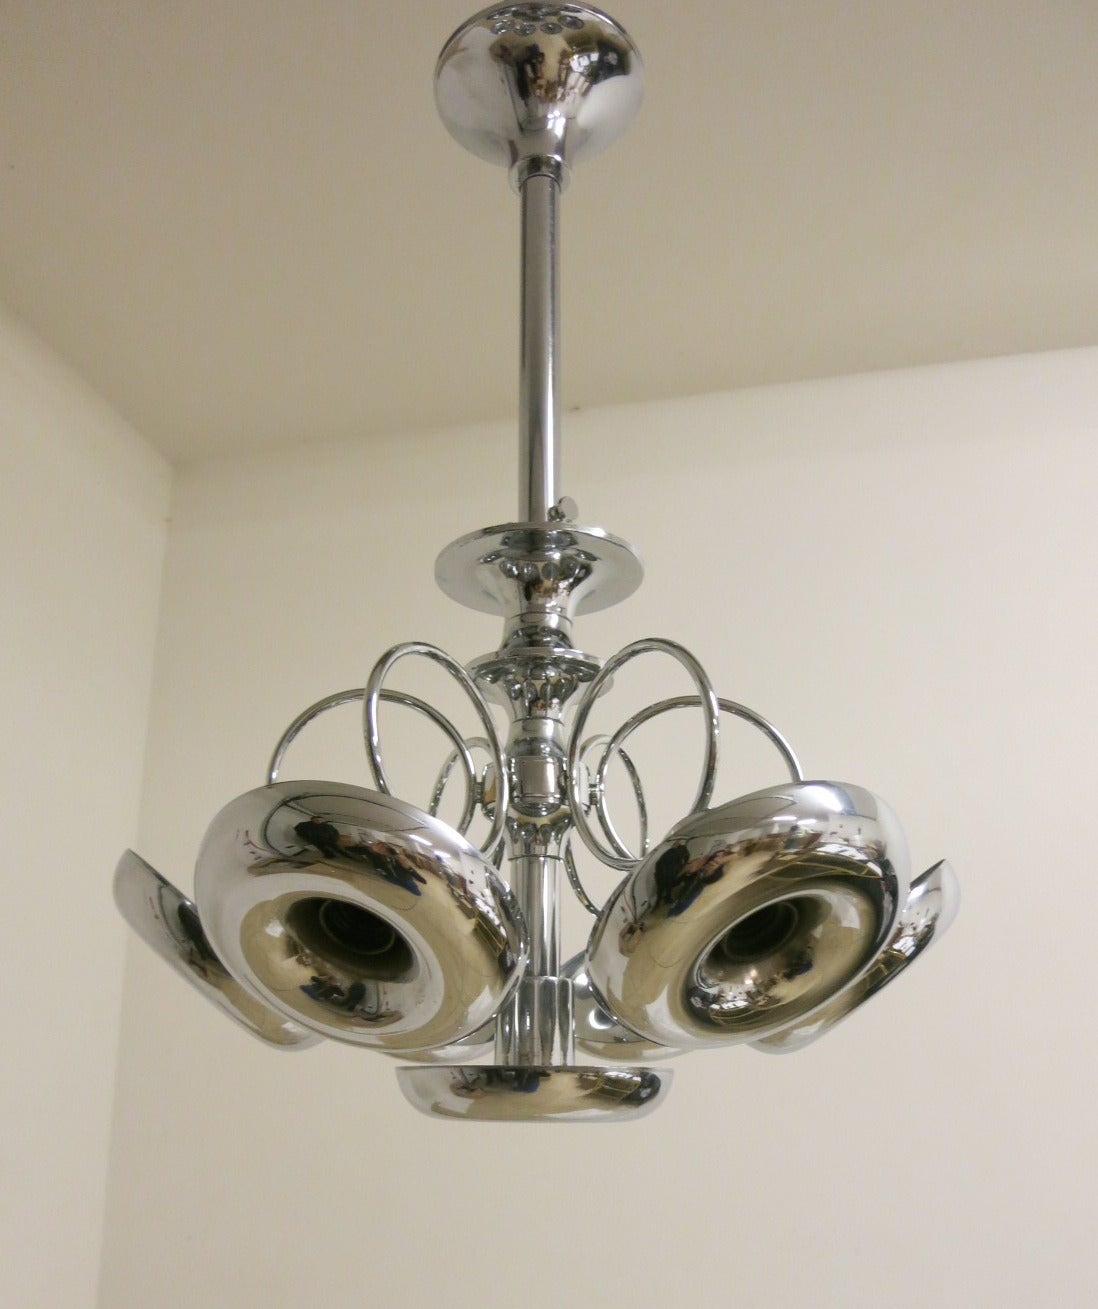 Seven-light chrome trumpets chandelier by Sciolari. Please note dimension of chandelier overall height is 30